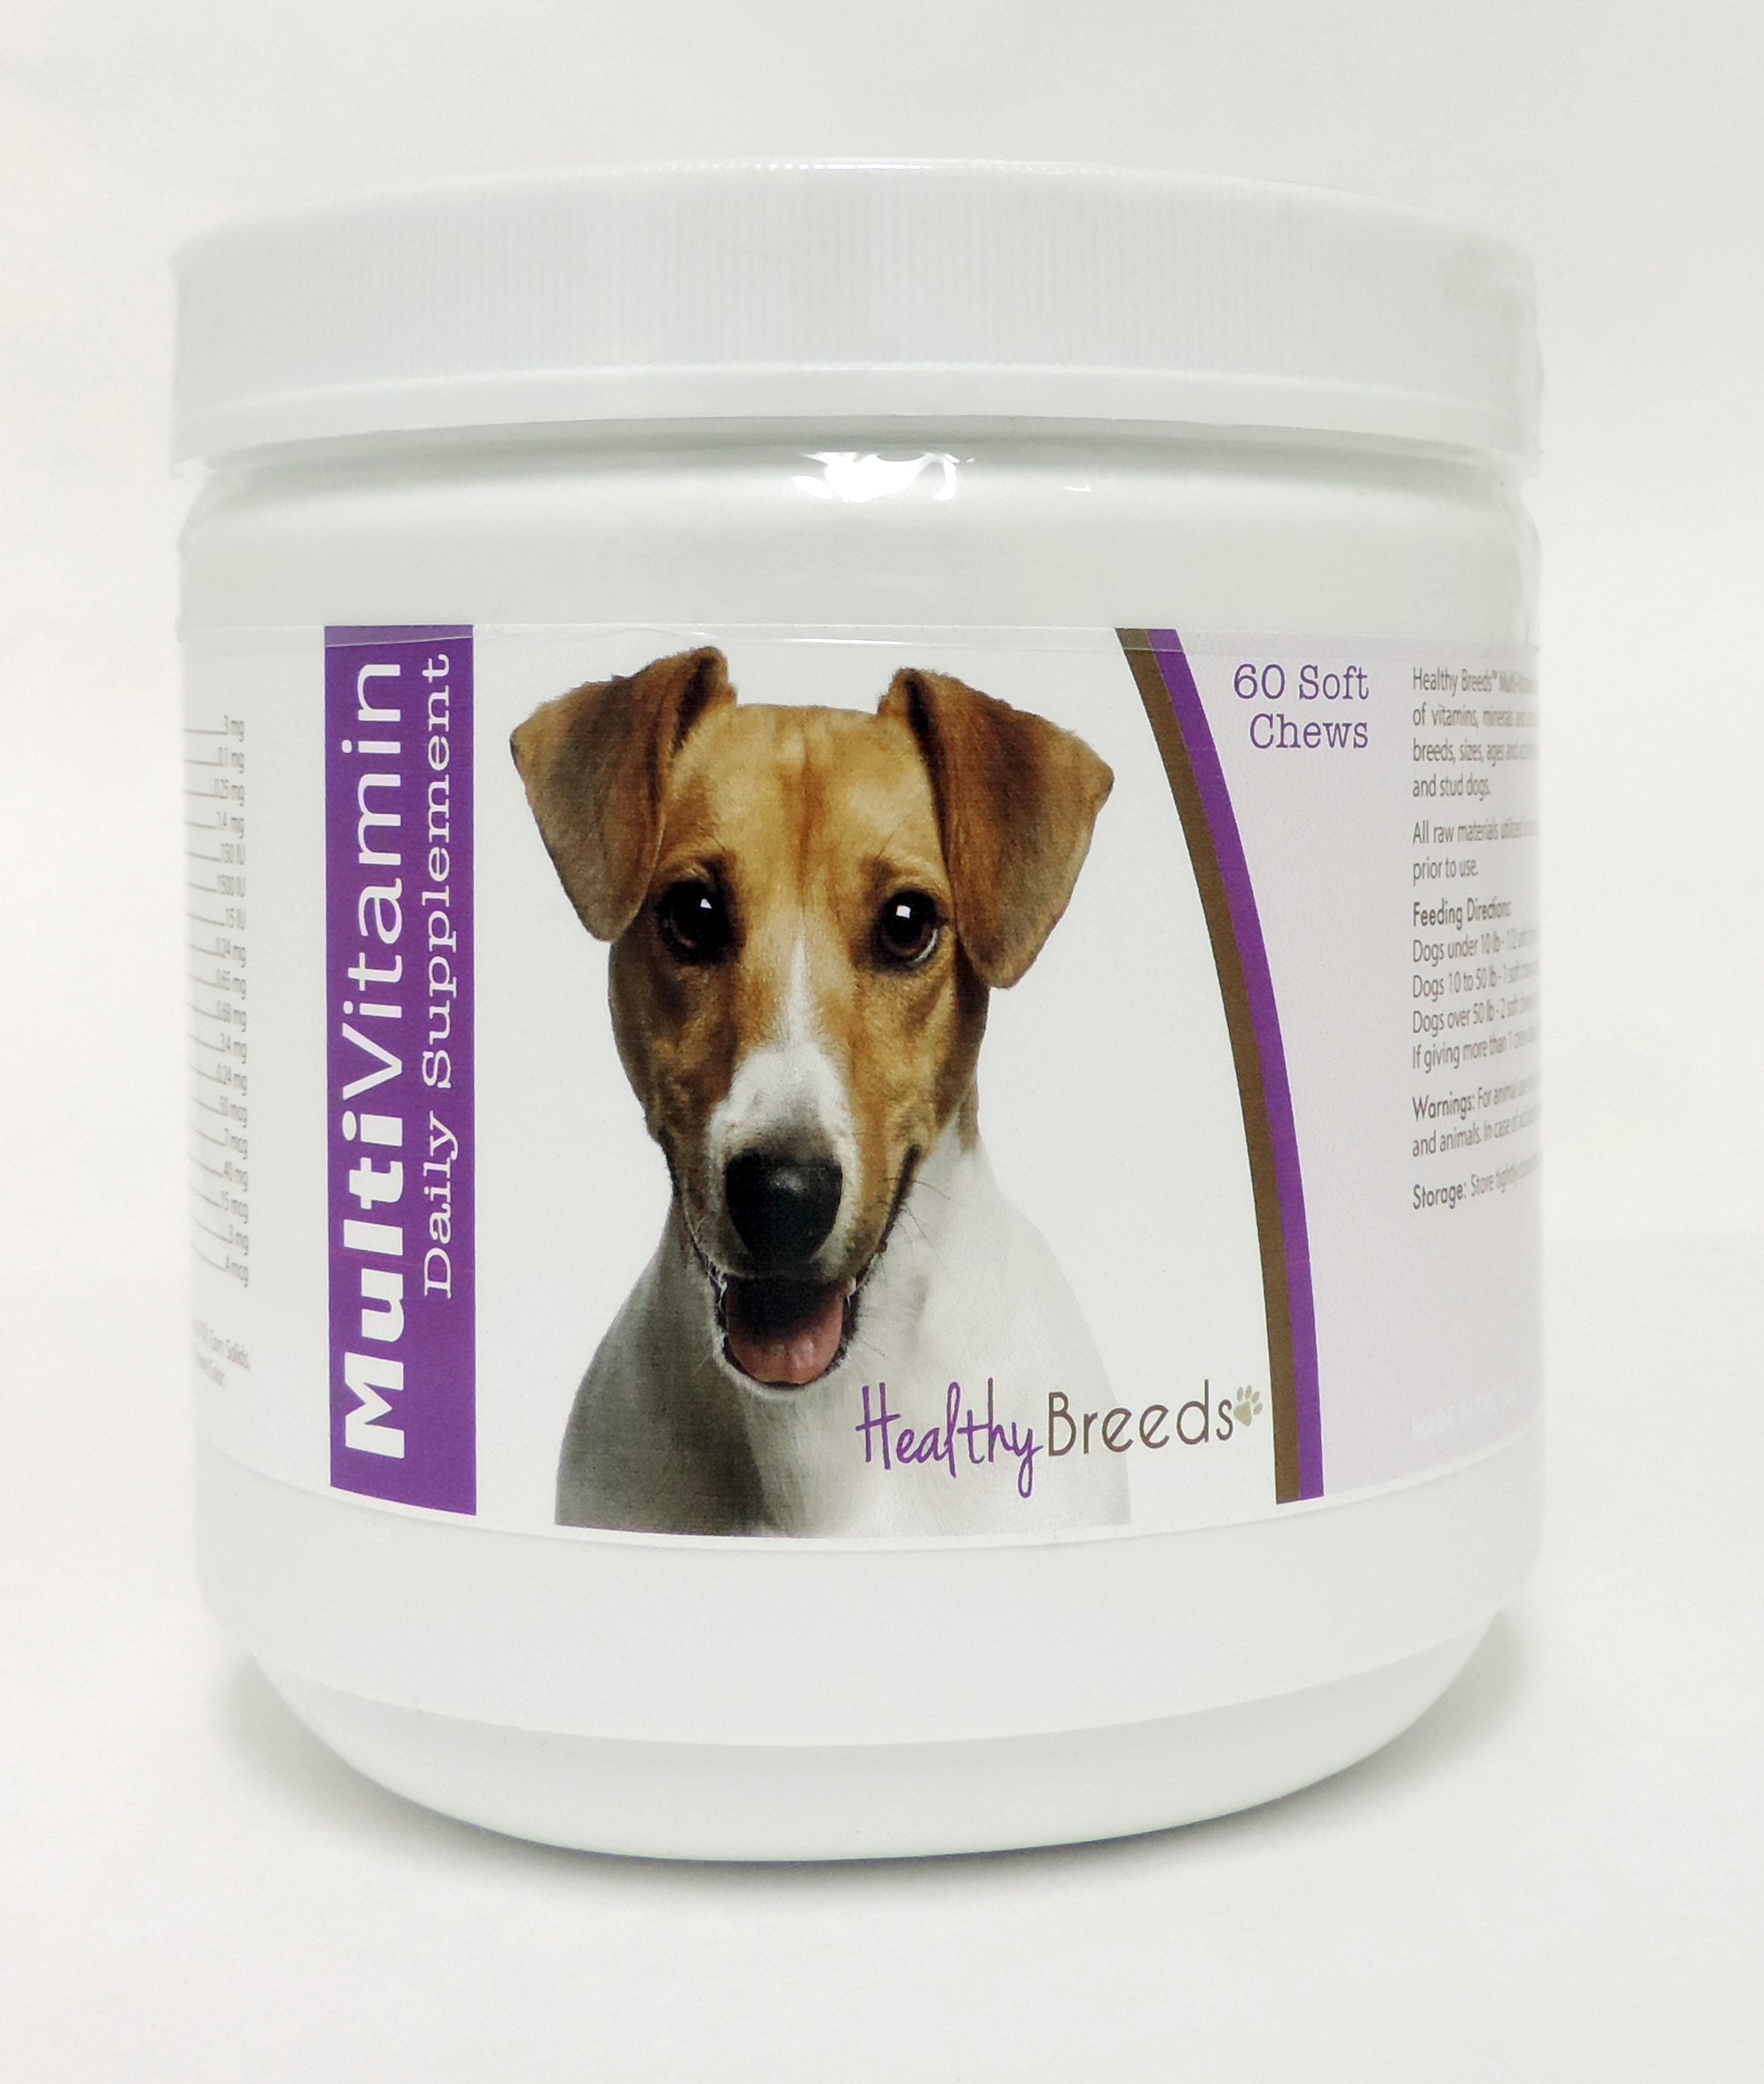 Jack Russell Terrier Multi-Vitamin Soft Chews 60 Count